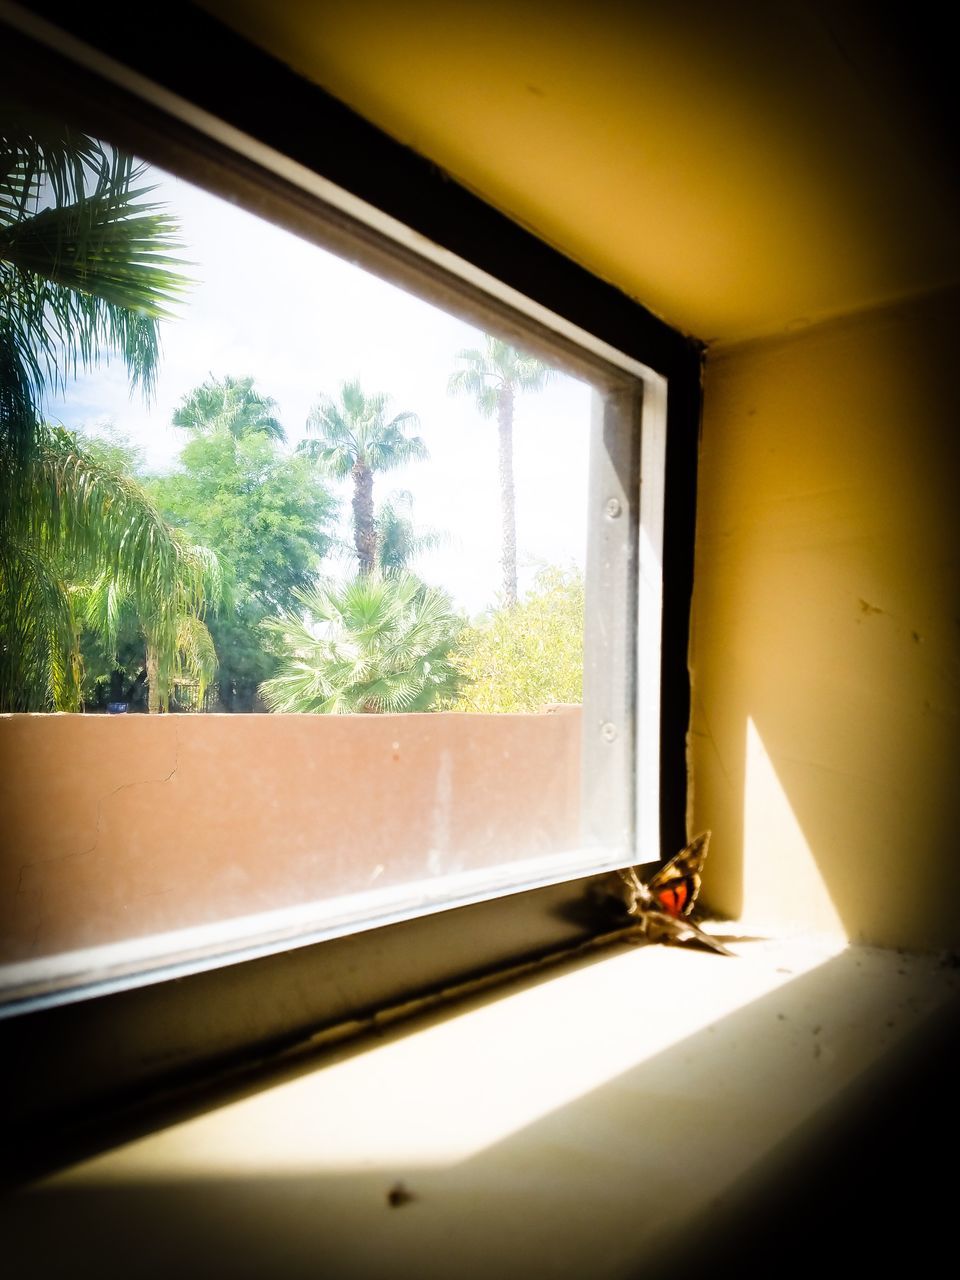 window, tree, indoors, glass - material, transparent, no people, day, nature, sunlight, plant, window sill, palm tree, domestic room, tropical climate, house, looking through window, architecture, home, growth, window frame